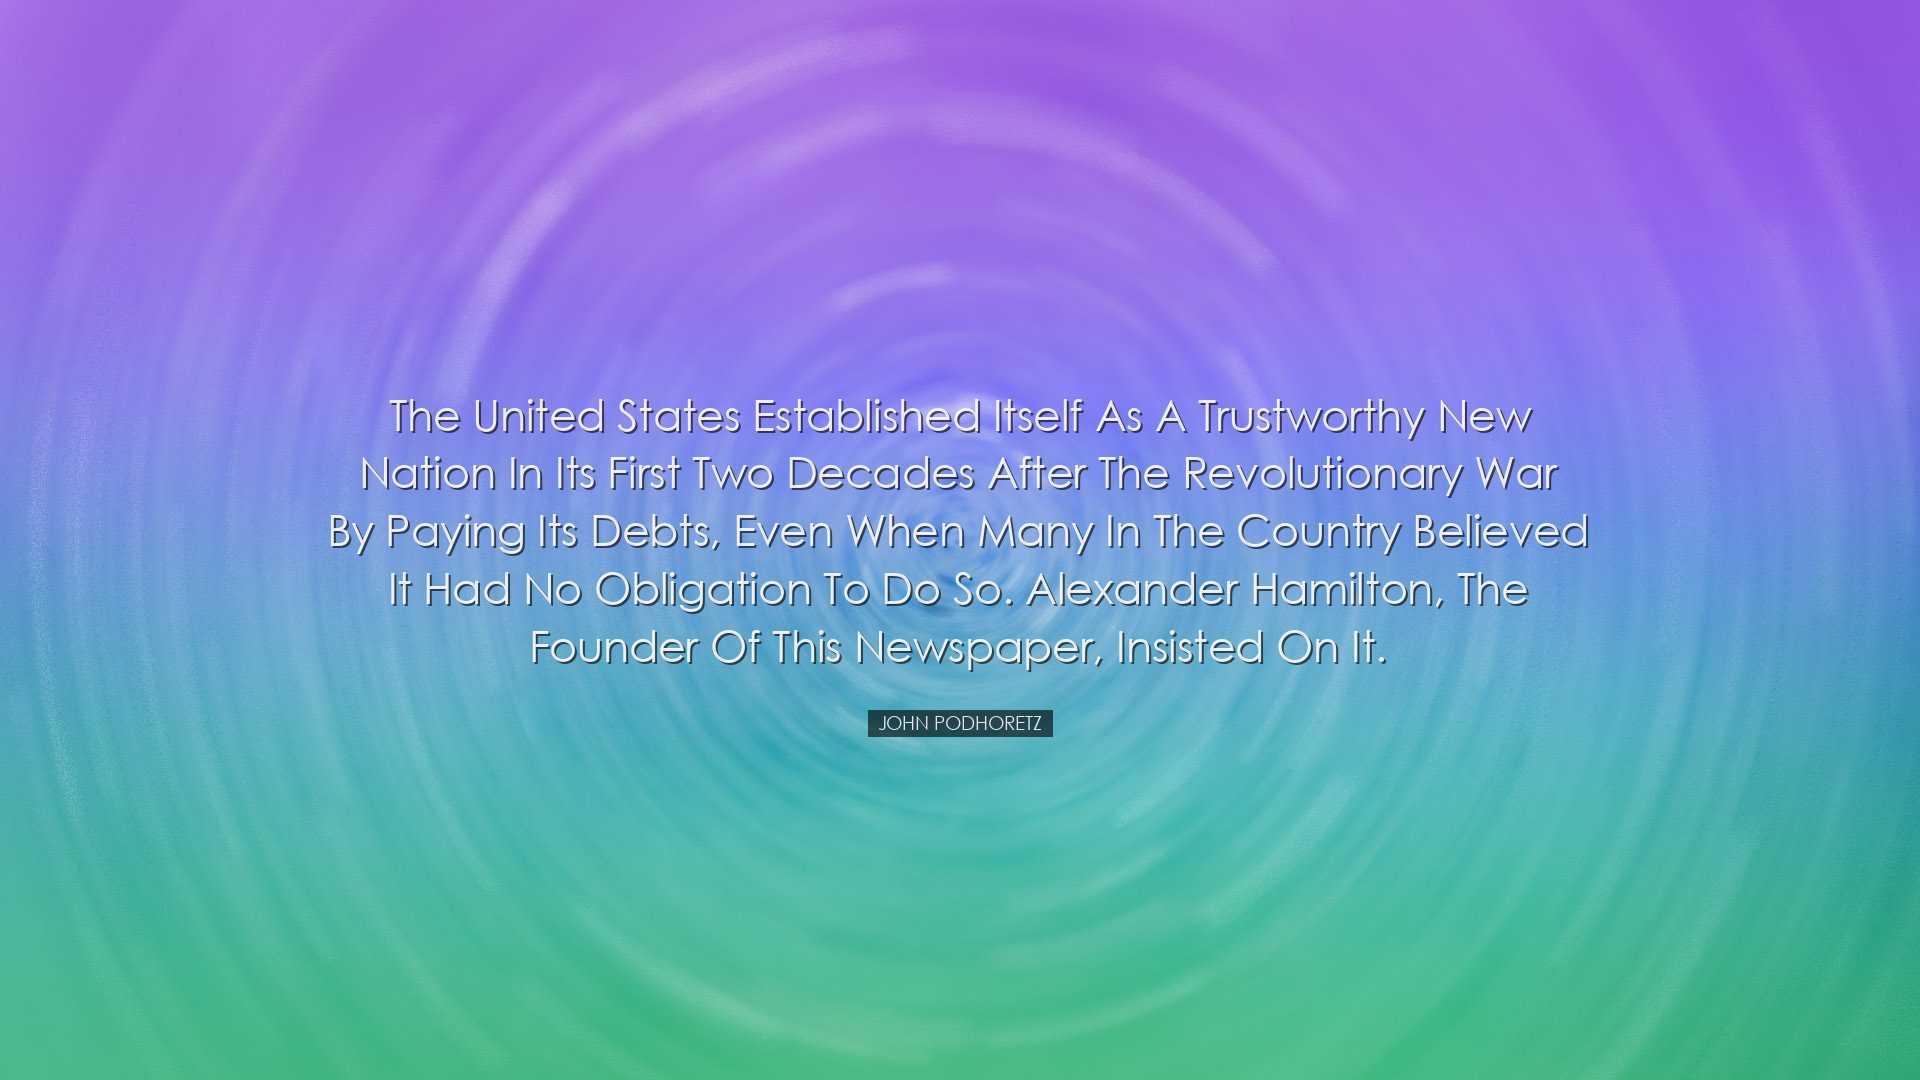 The United States established itself as a trustworthy new nation i